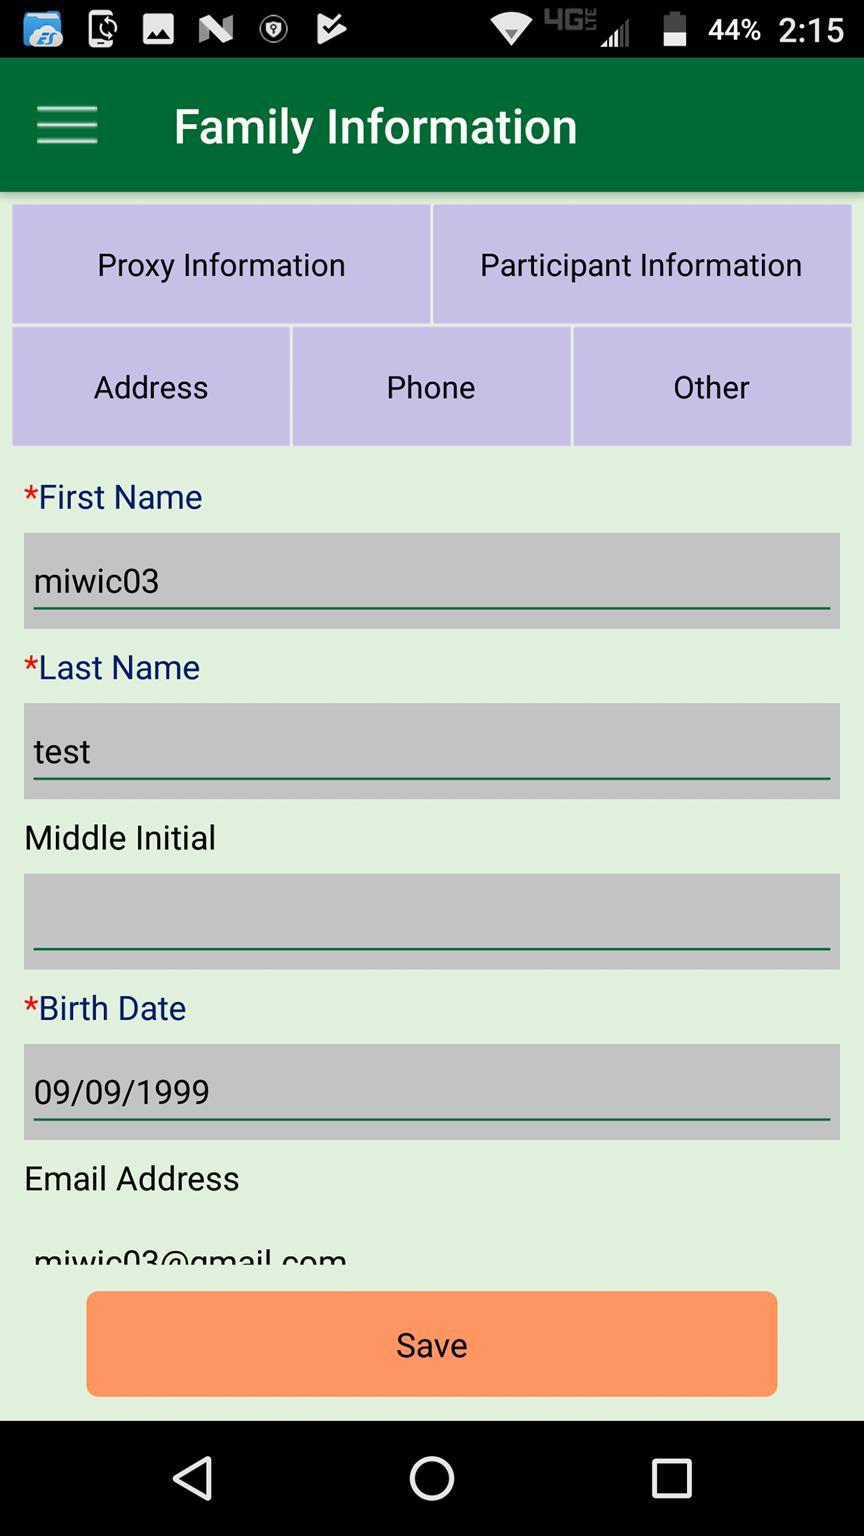 Family Information View WIC Client Family Information